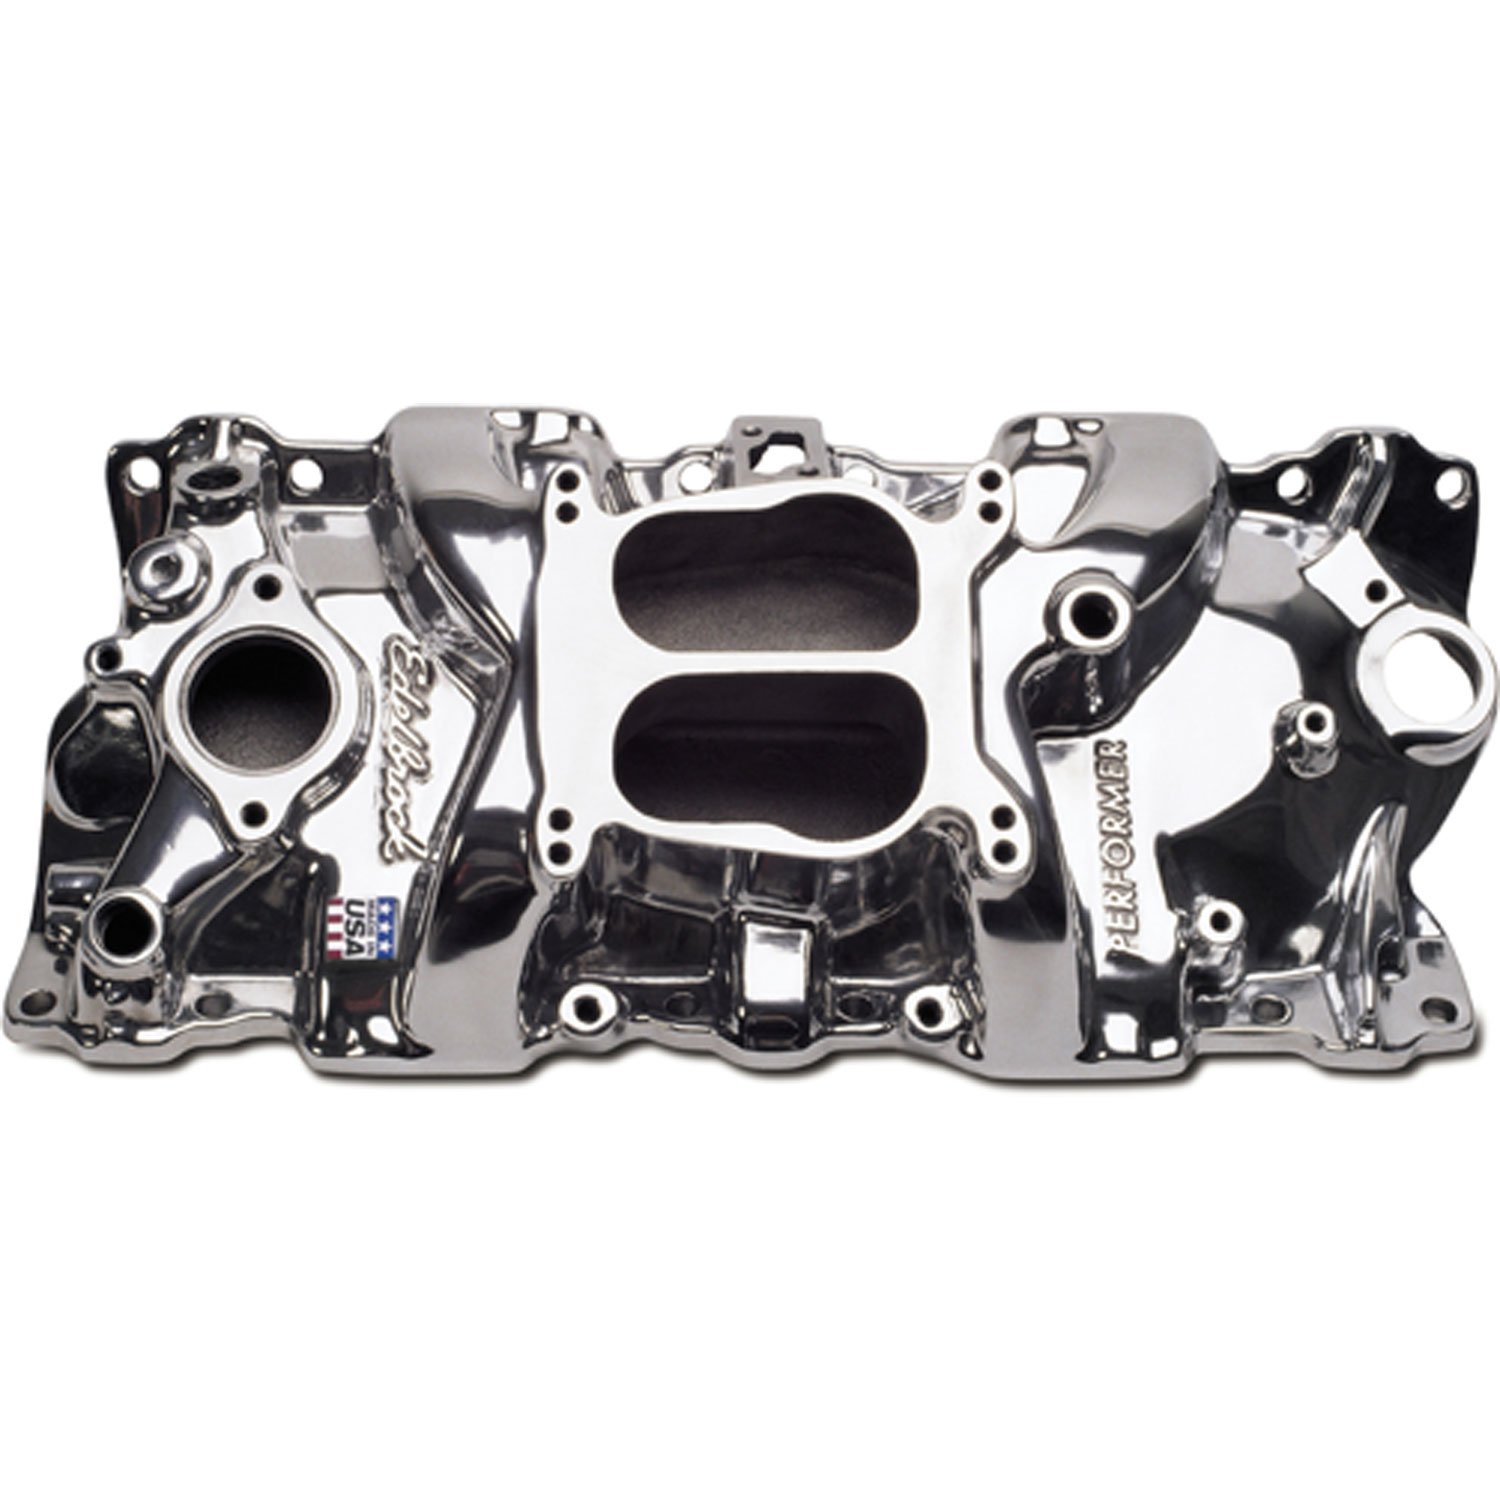 Performer Polished Intake Manifold for Small Block Chevy